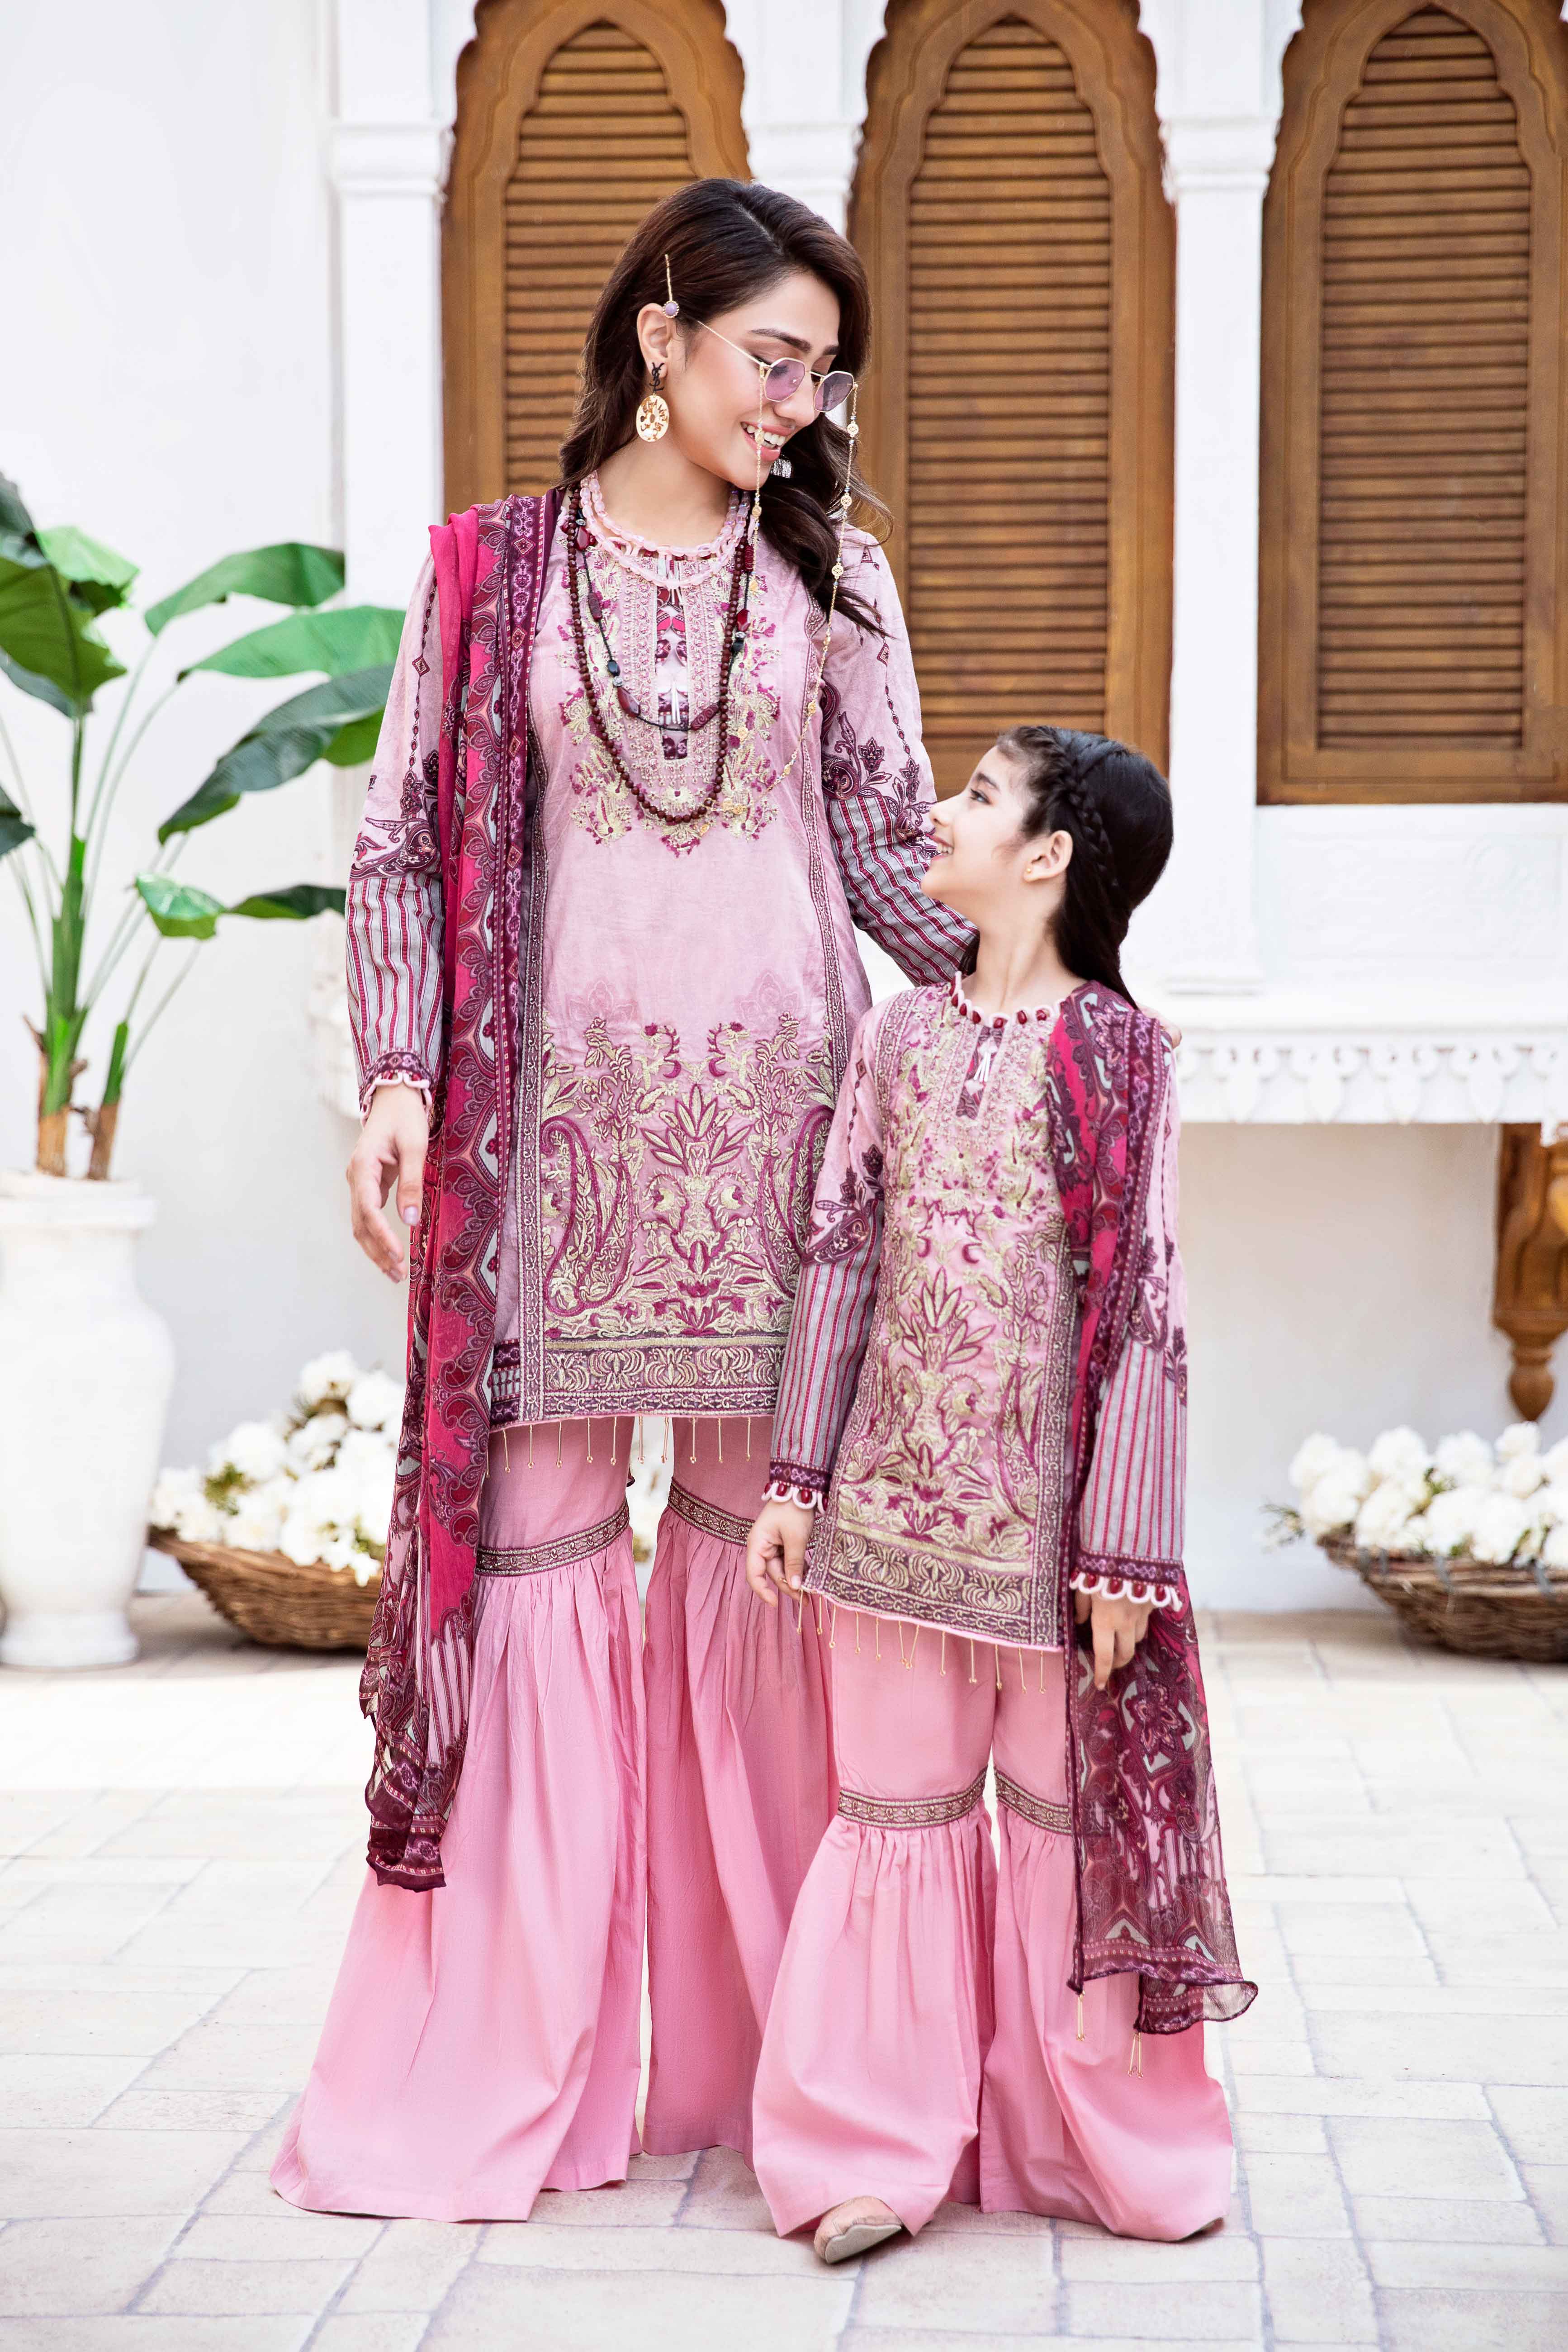 Mummy and Me Gharara outfit